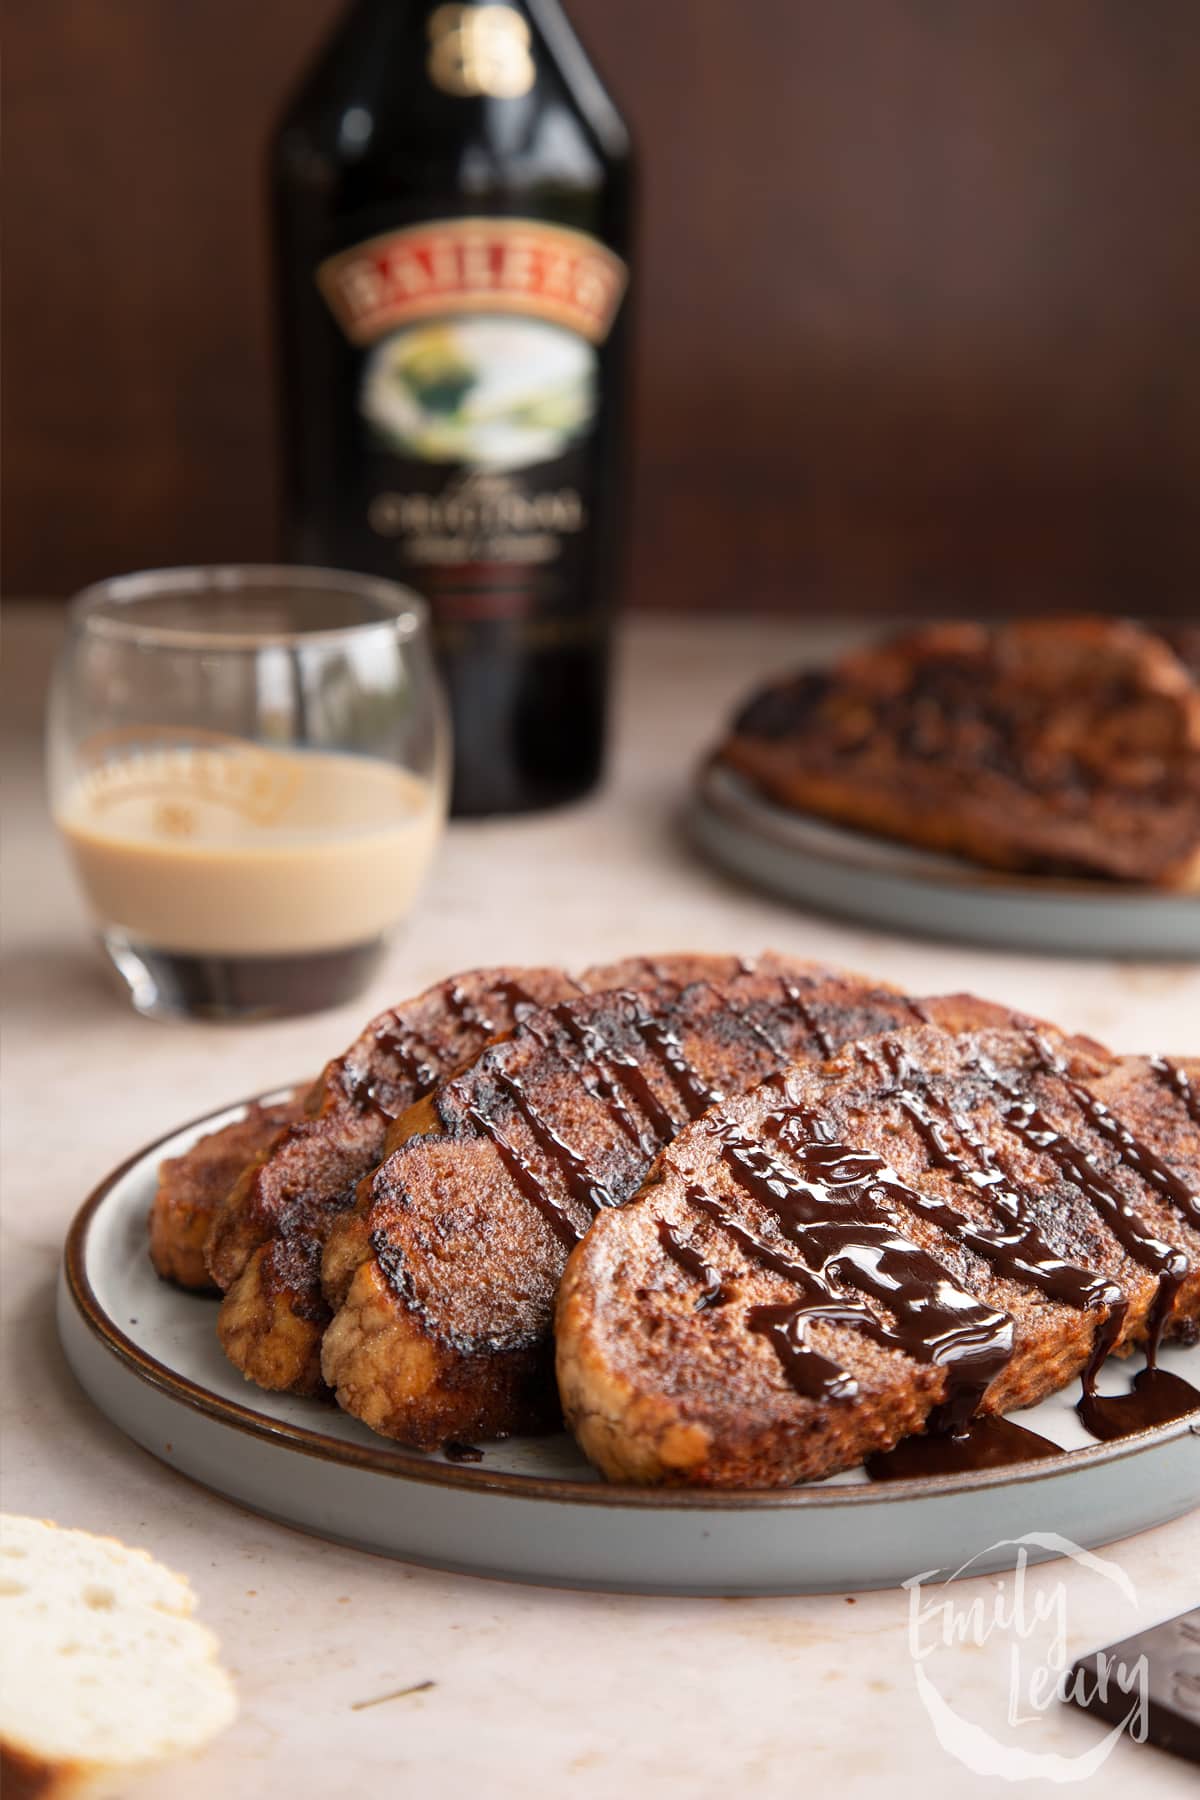 The finished Baileys French toast drizzled with syrup.